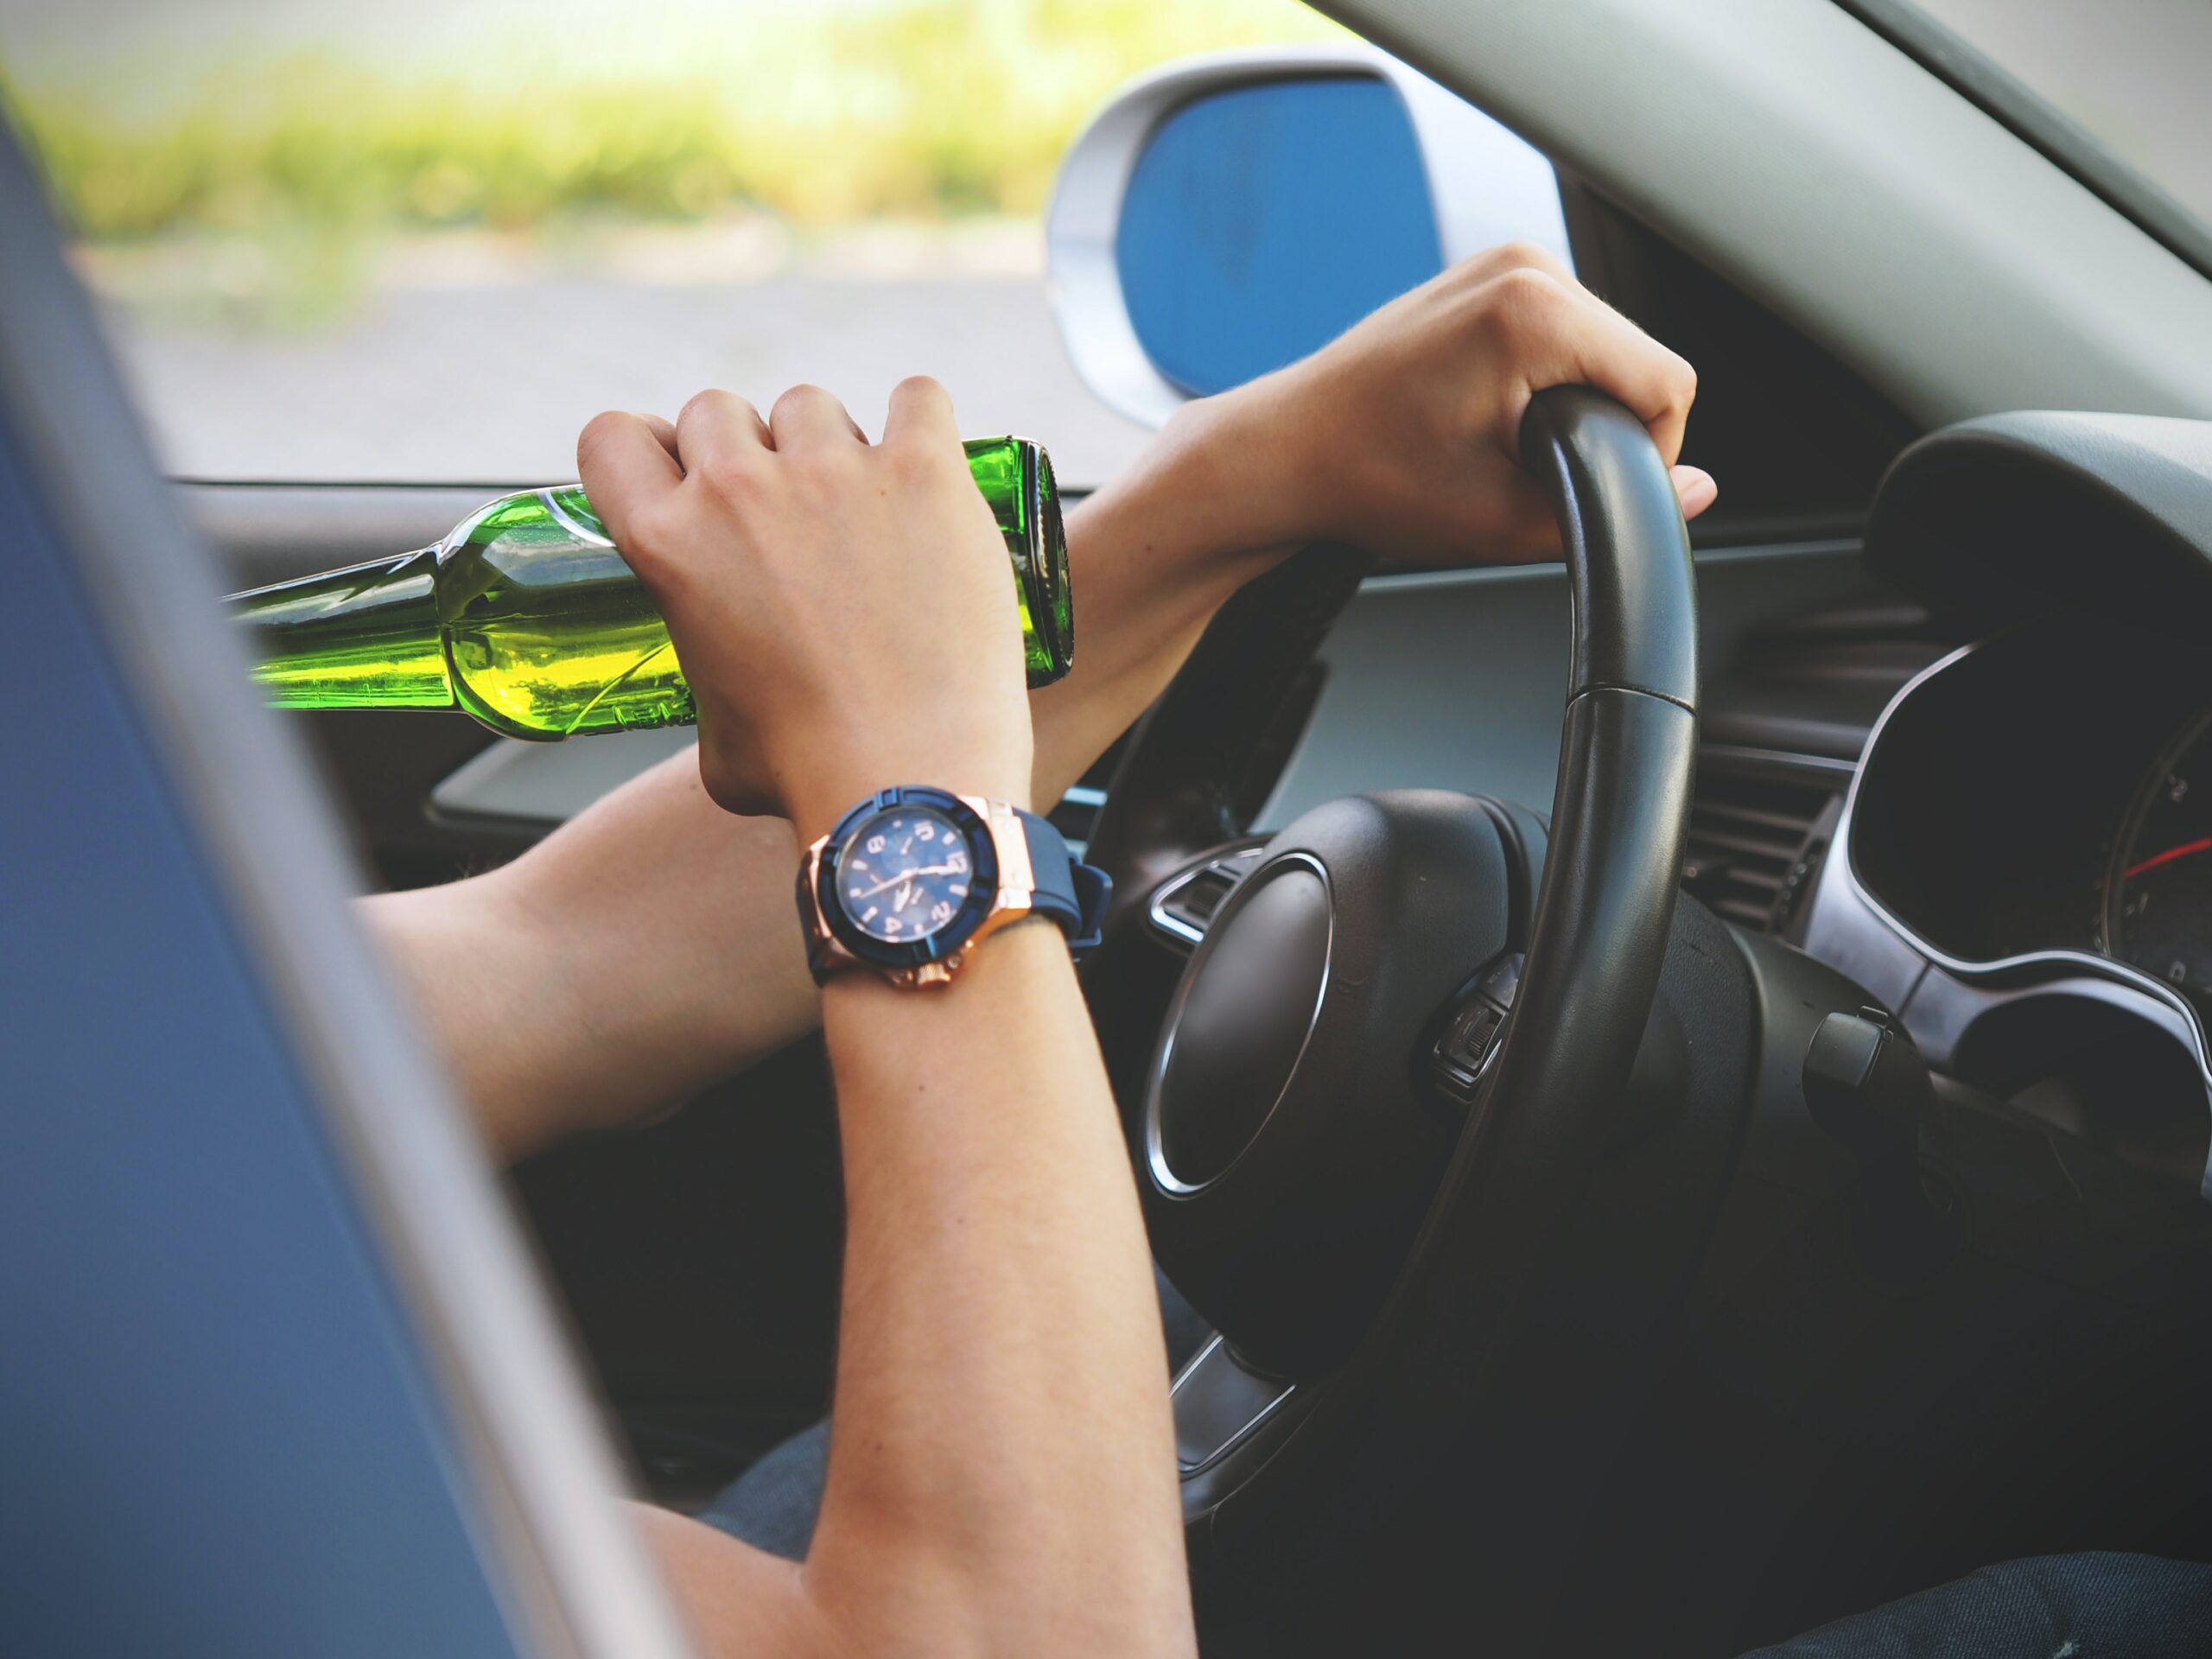 Drunk driver. The Law Offices of Nicholas a. Parr is the best option for you in cases like this.